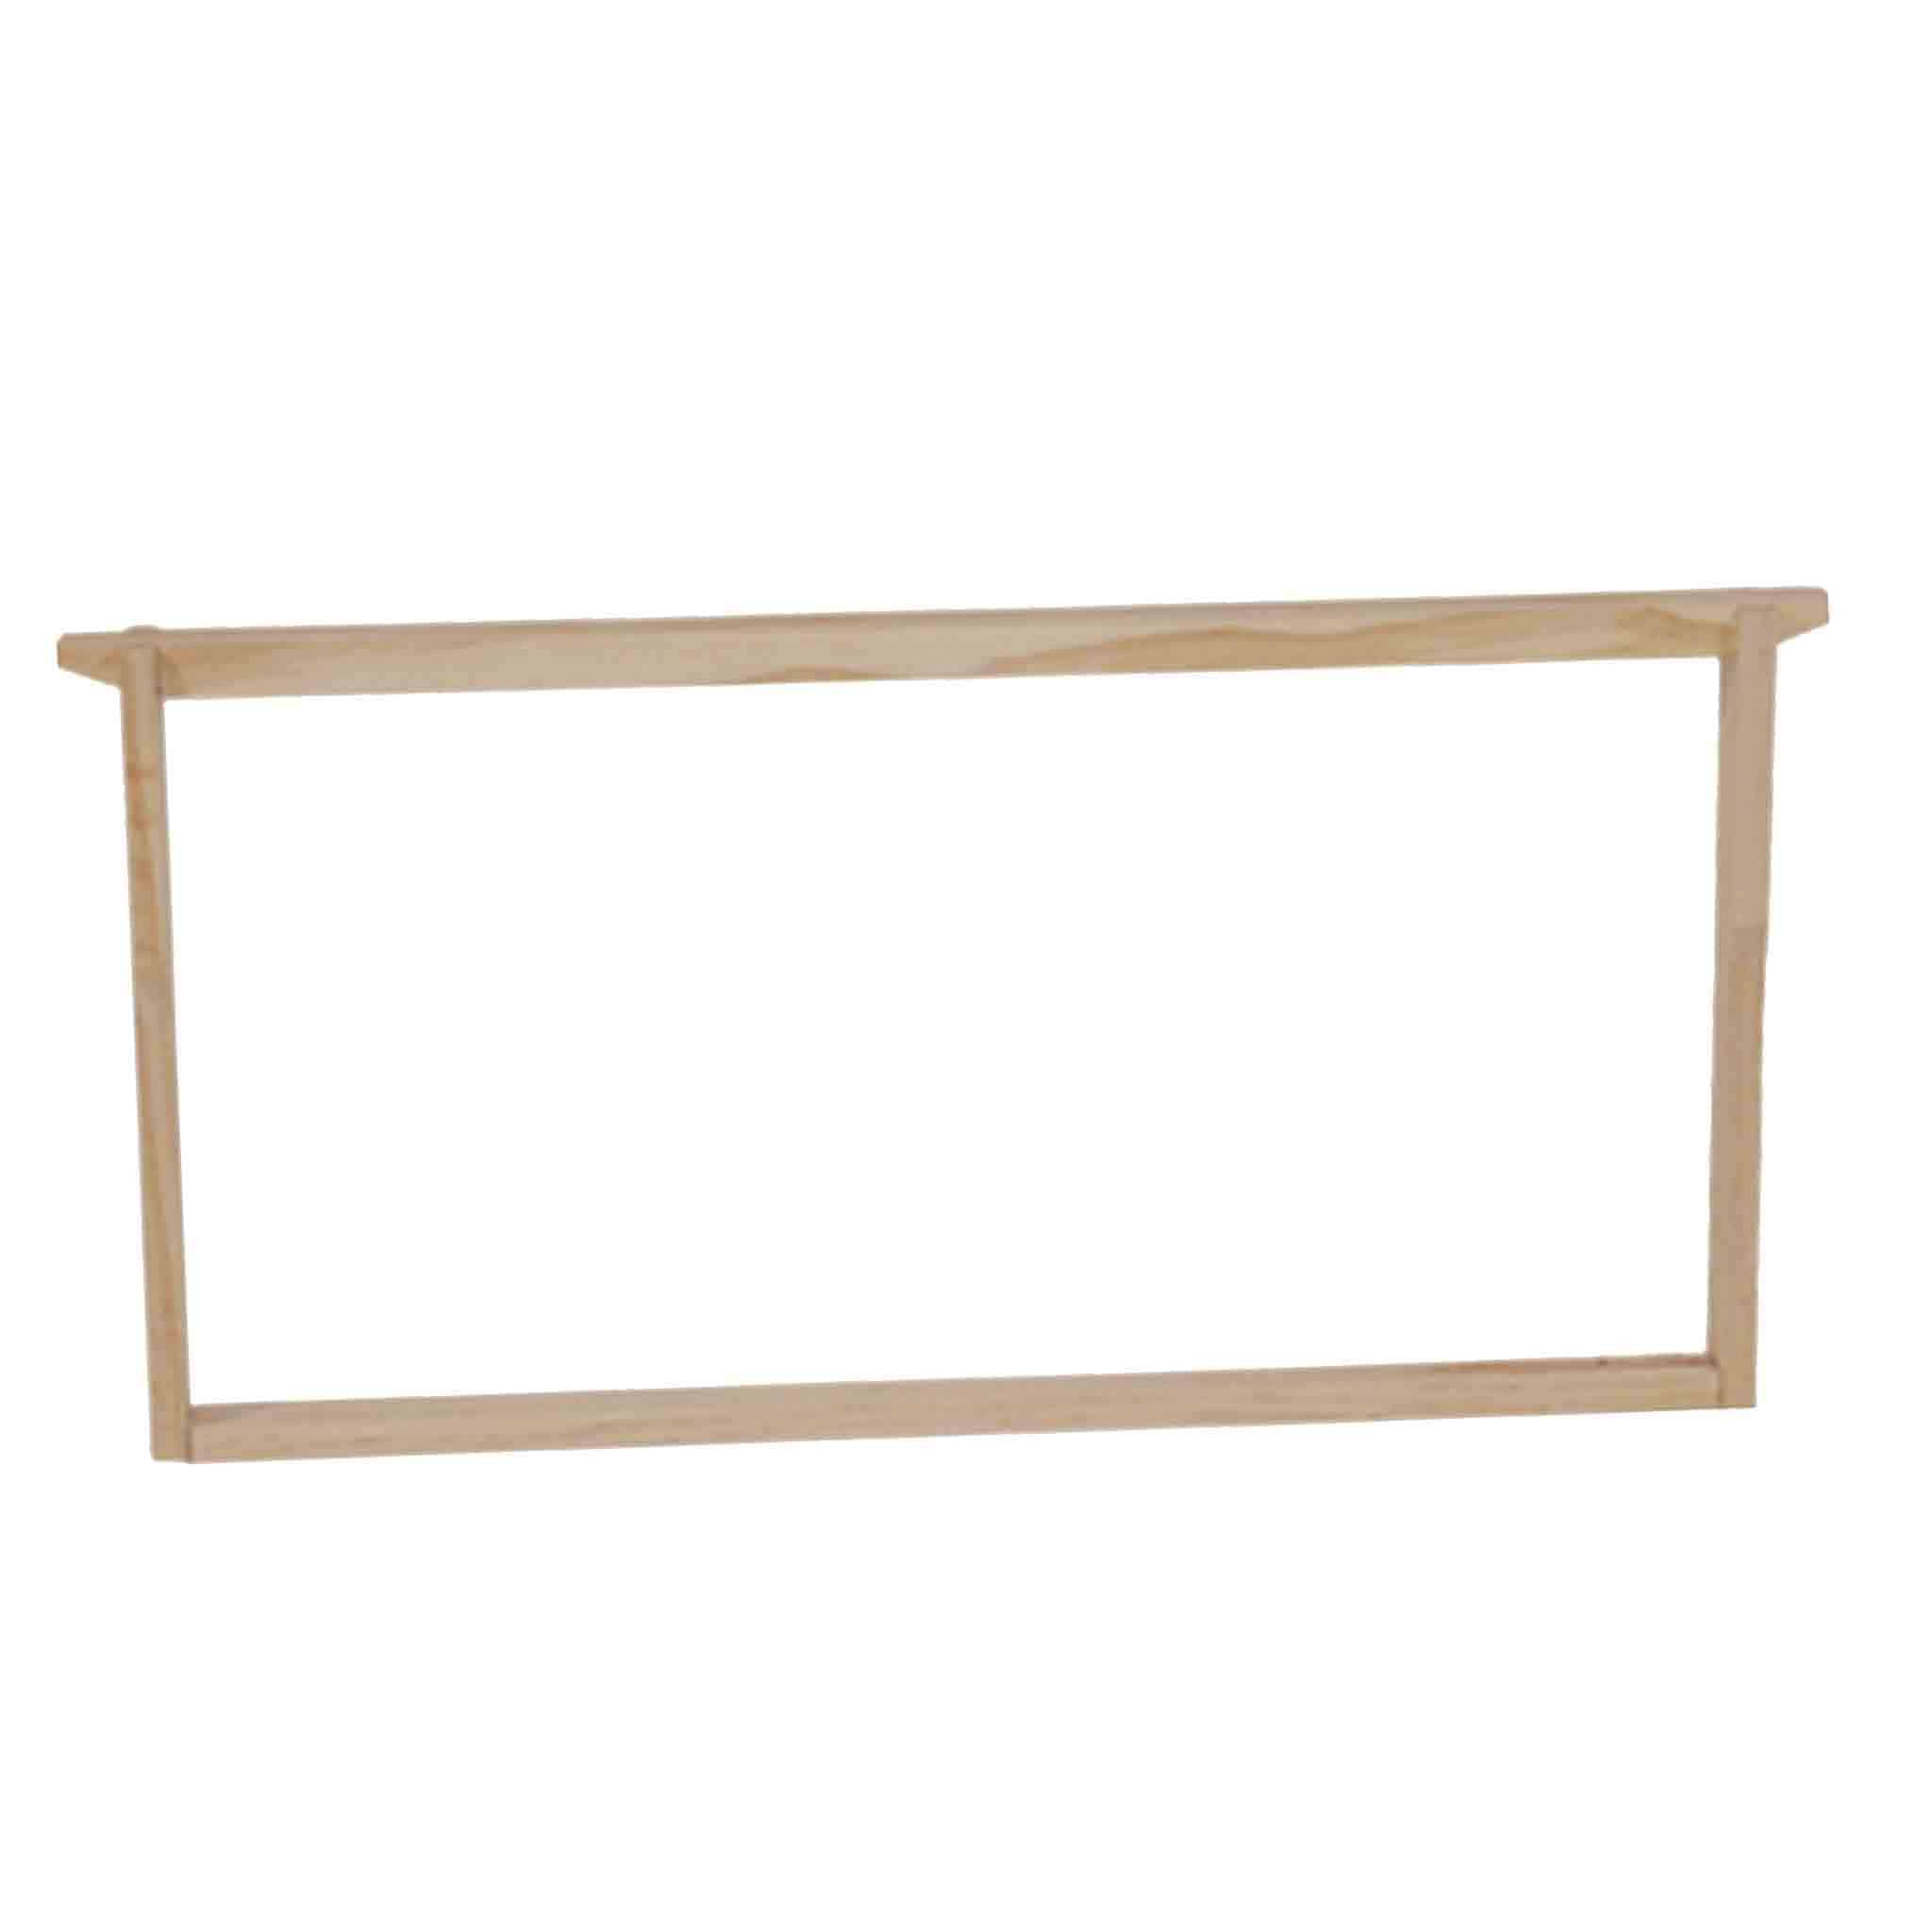 Commercial Grade Wooden Full Depth Beekeeping Frames - Hive Parts collection by Buzzbee Beekeeping Supplies